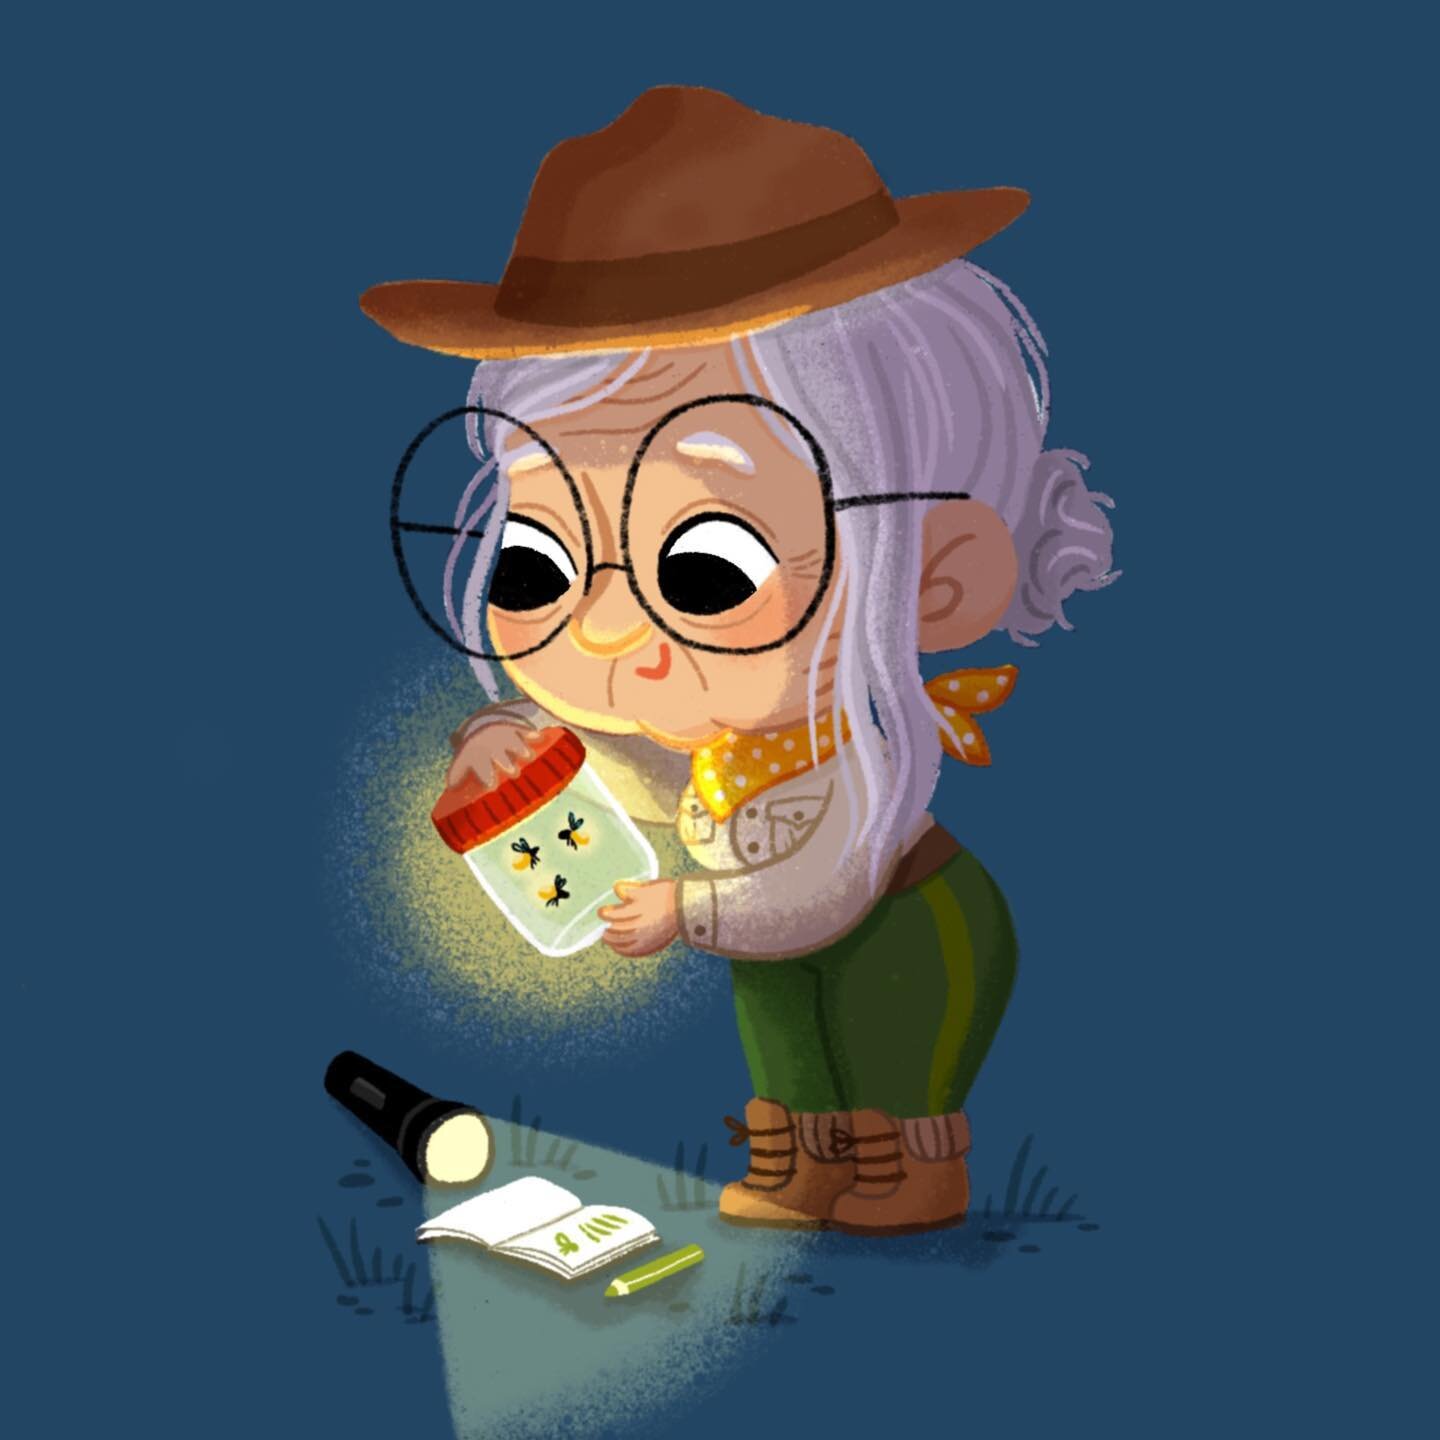 CHARACTER STUDY from a while ago ... SWIPE for more  #exploring #naturelover #adventureisoutthere #hiking #thegreatoutdoors #gonesquatching #intothewoods #grandma #scientist #wildlifeenthusiast